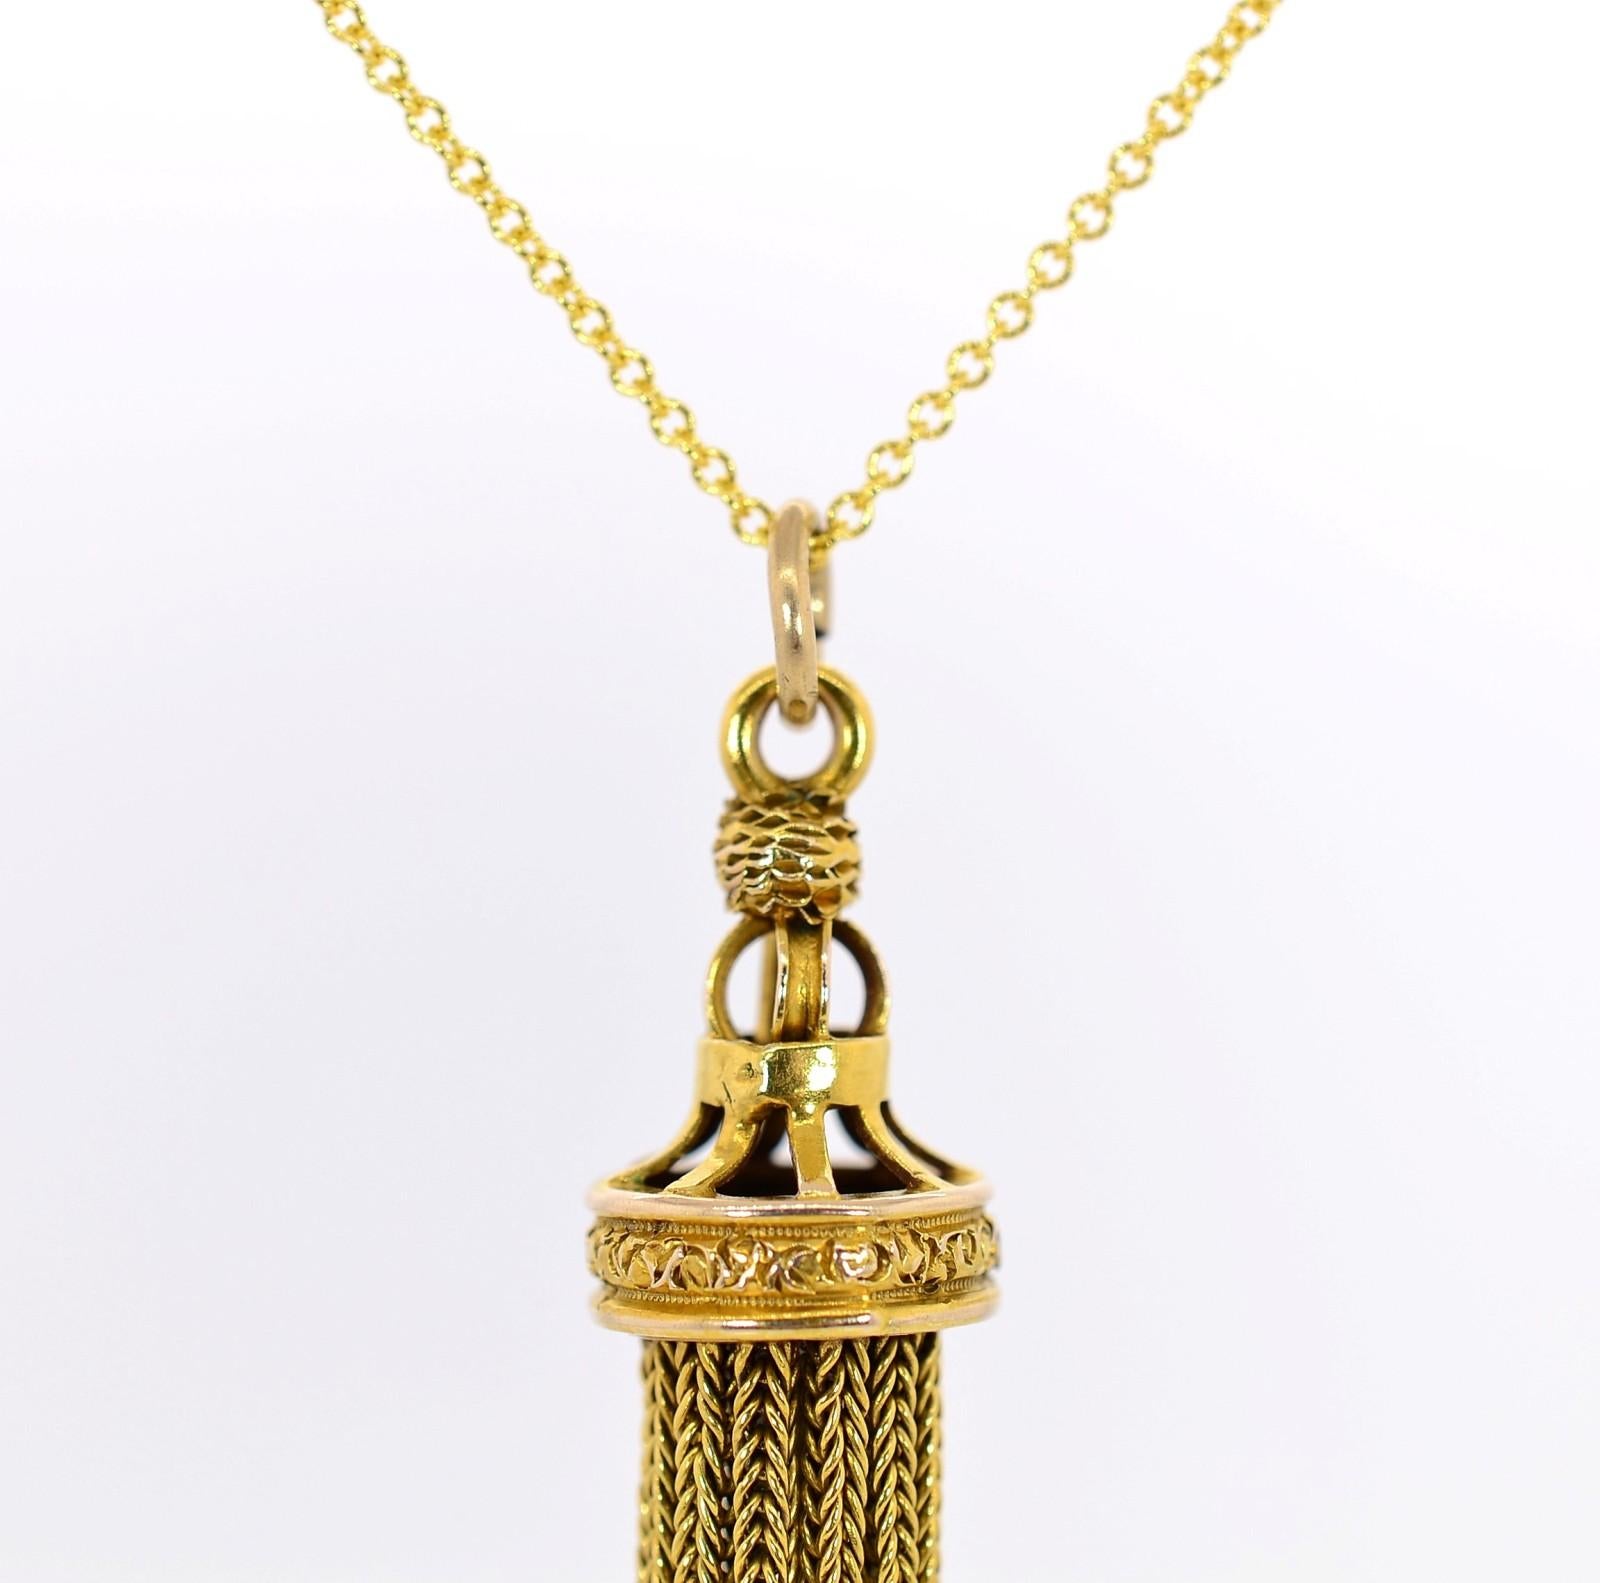 Classic Victorian, this 1890s era 14KT yellow gold pendant exudes antiquity.  The cap is adorned with hand engraving, and the dangling fox tail chains gently sway to-and-fro.  Pendant is suspended from 18